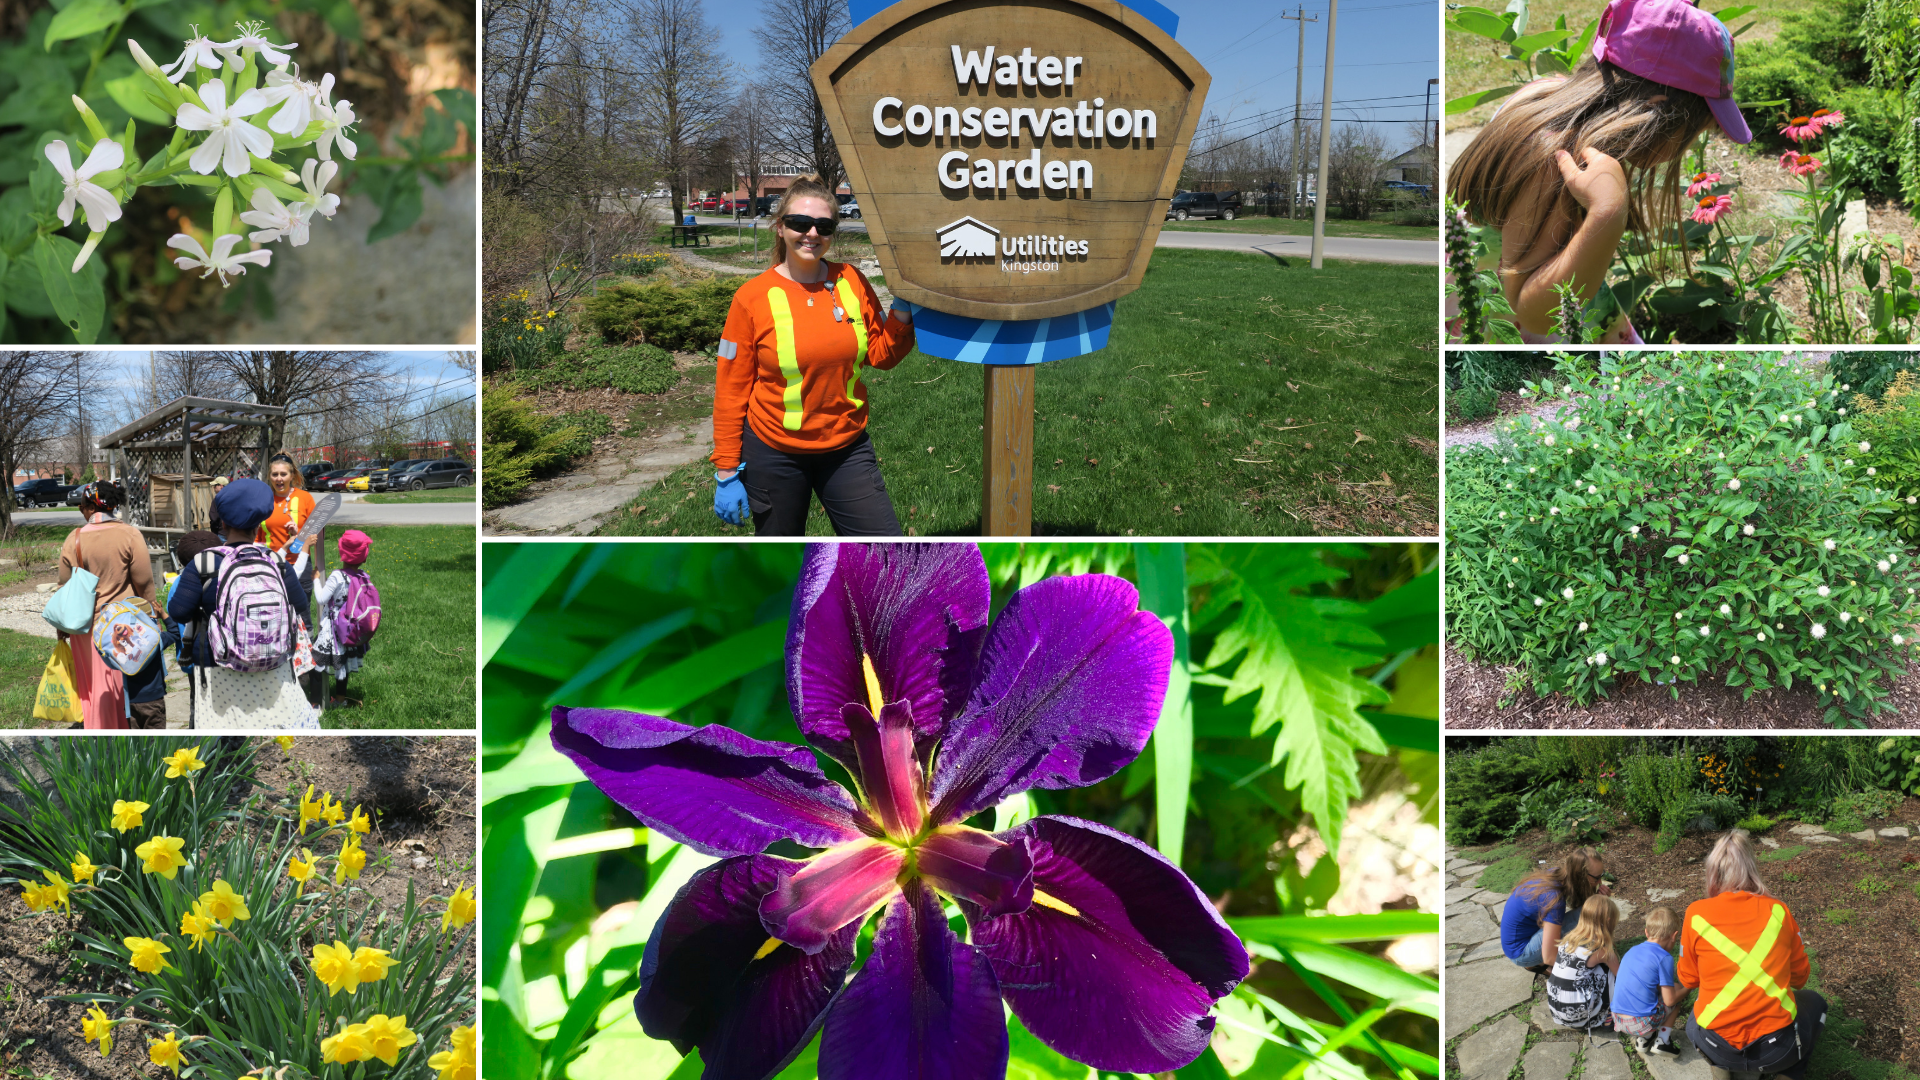 A collage of people and flowers in the water conservation garden.